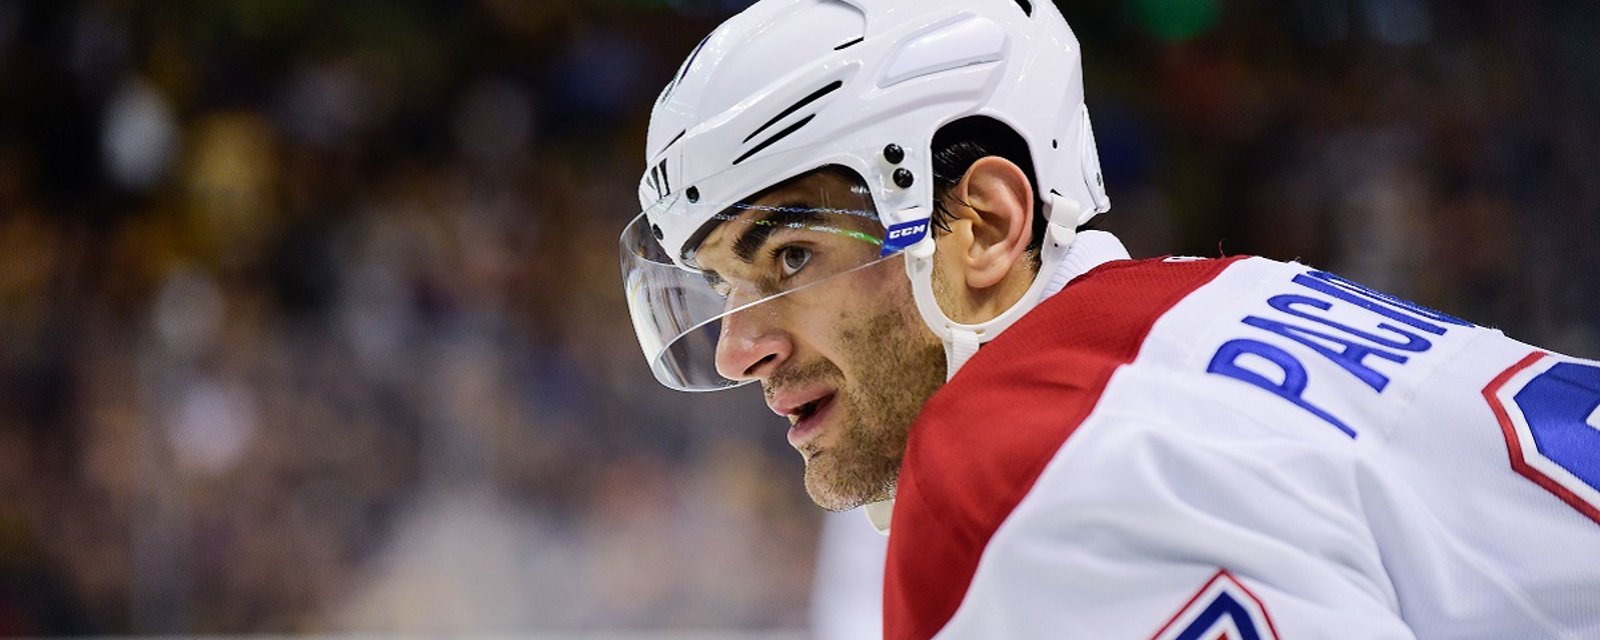 Breaking: Update on Habs captain Max Pacioretty who was injured at practice today.